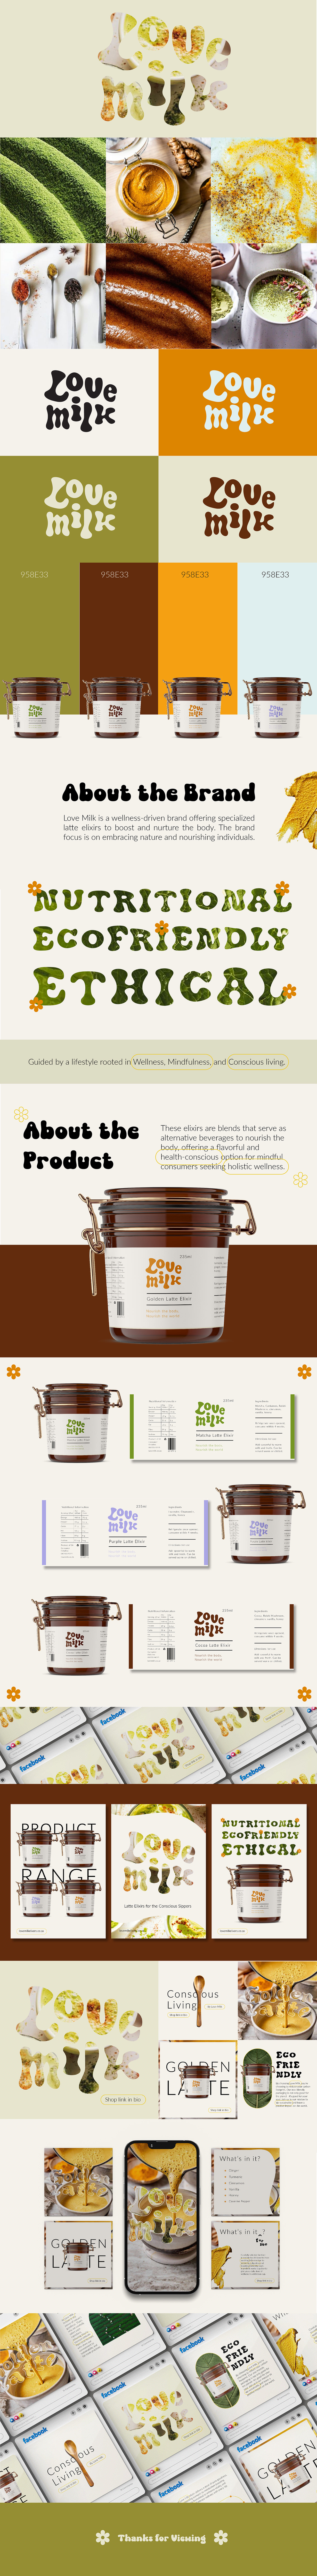 conceptualized milk elixir product visual identity and social media posts. 